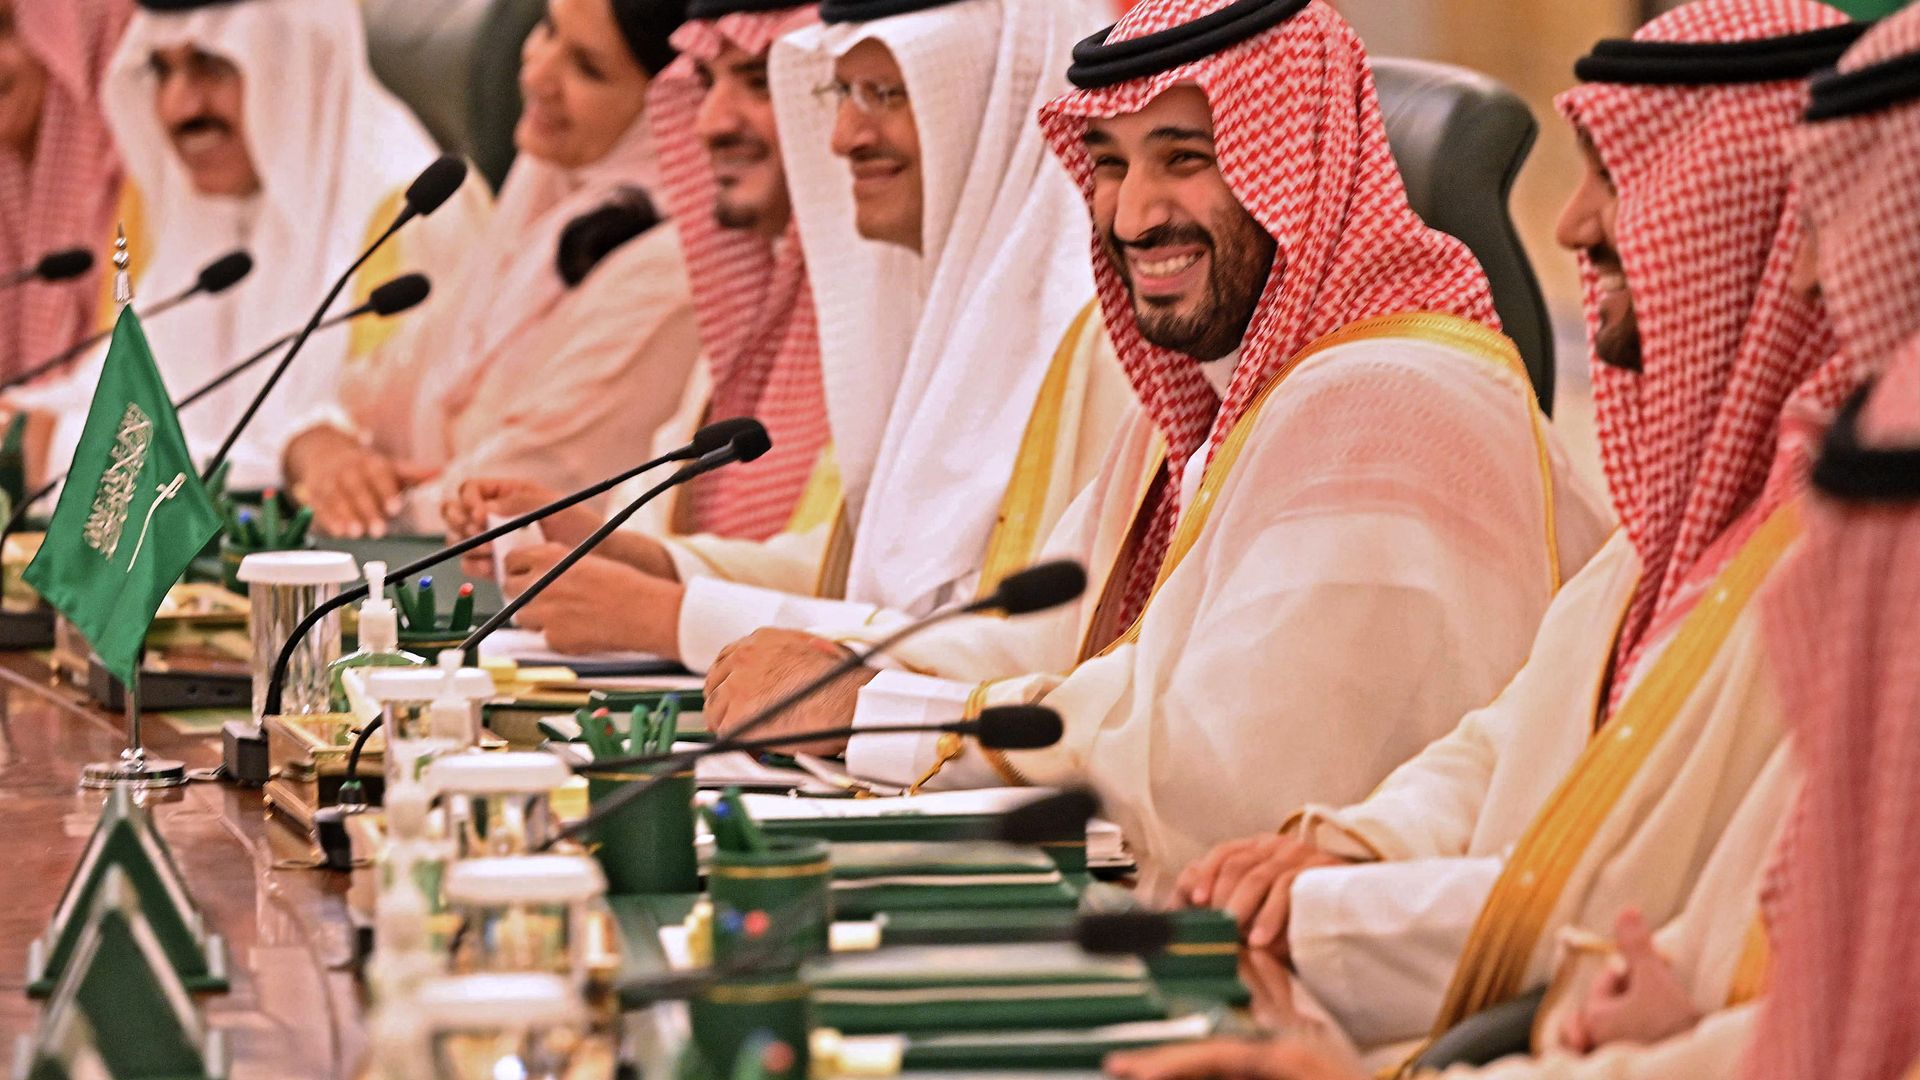 Saudi Arabias Crown Prince Mohammed bin Salman and other Saudi officials hold a working session with President Biden and other U.S. officials.